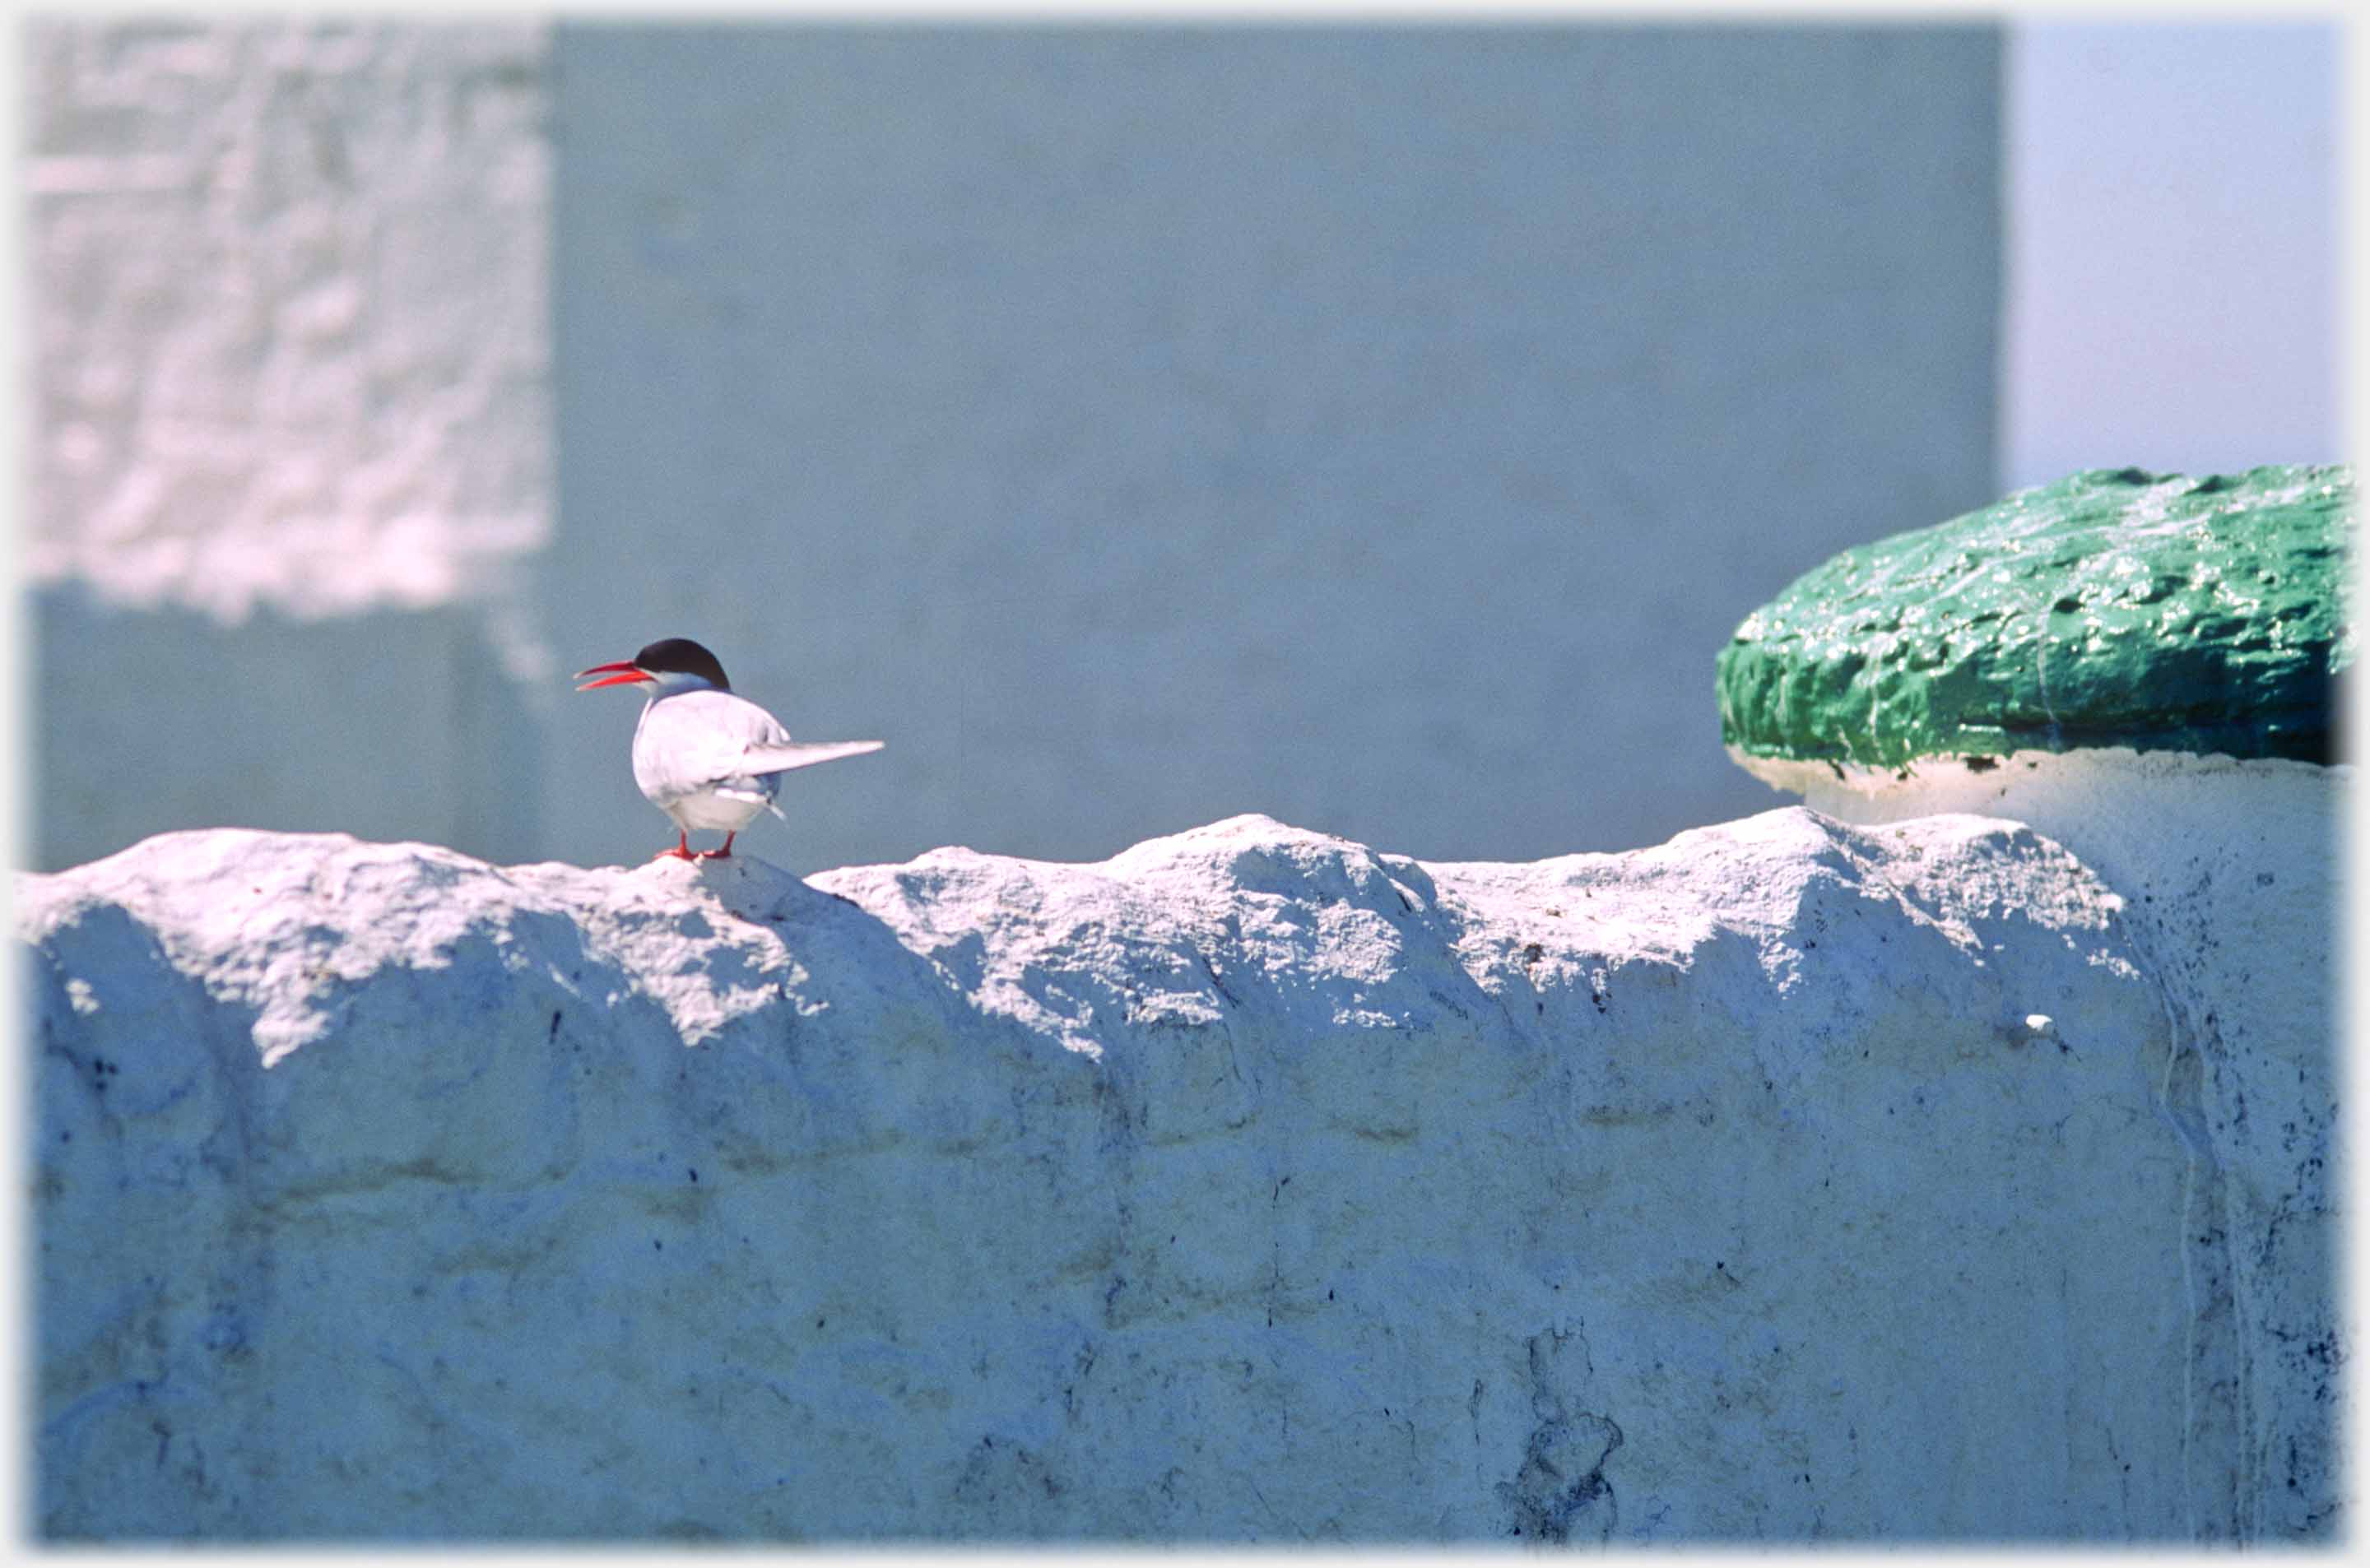 White wall with green capstone and white wall beyond. Red beaked tern standing on wall.